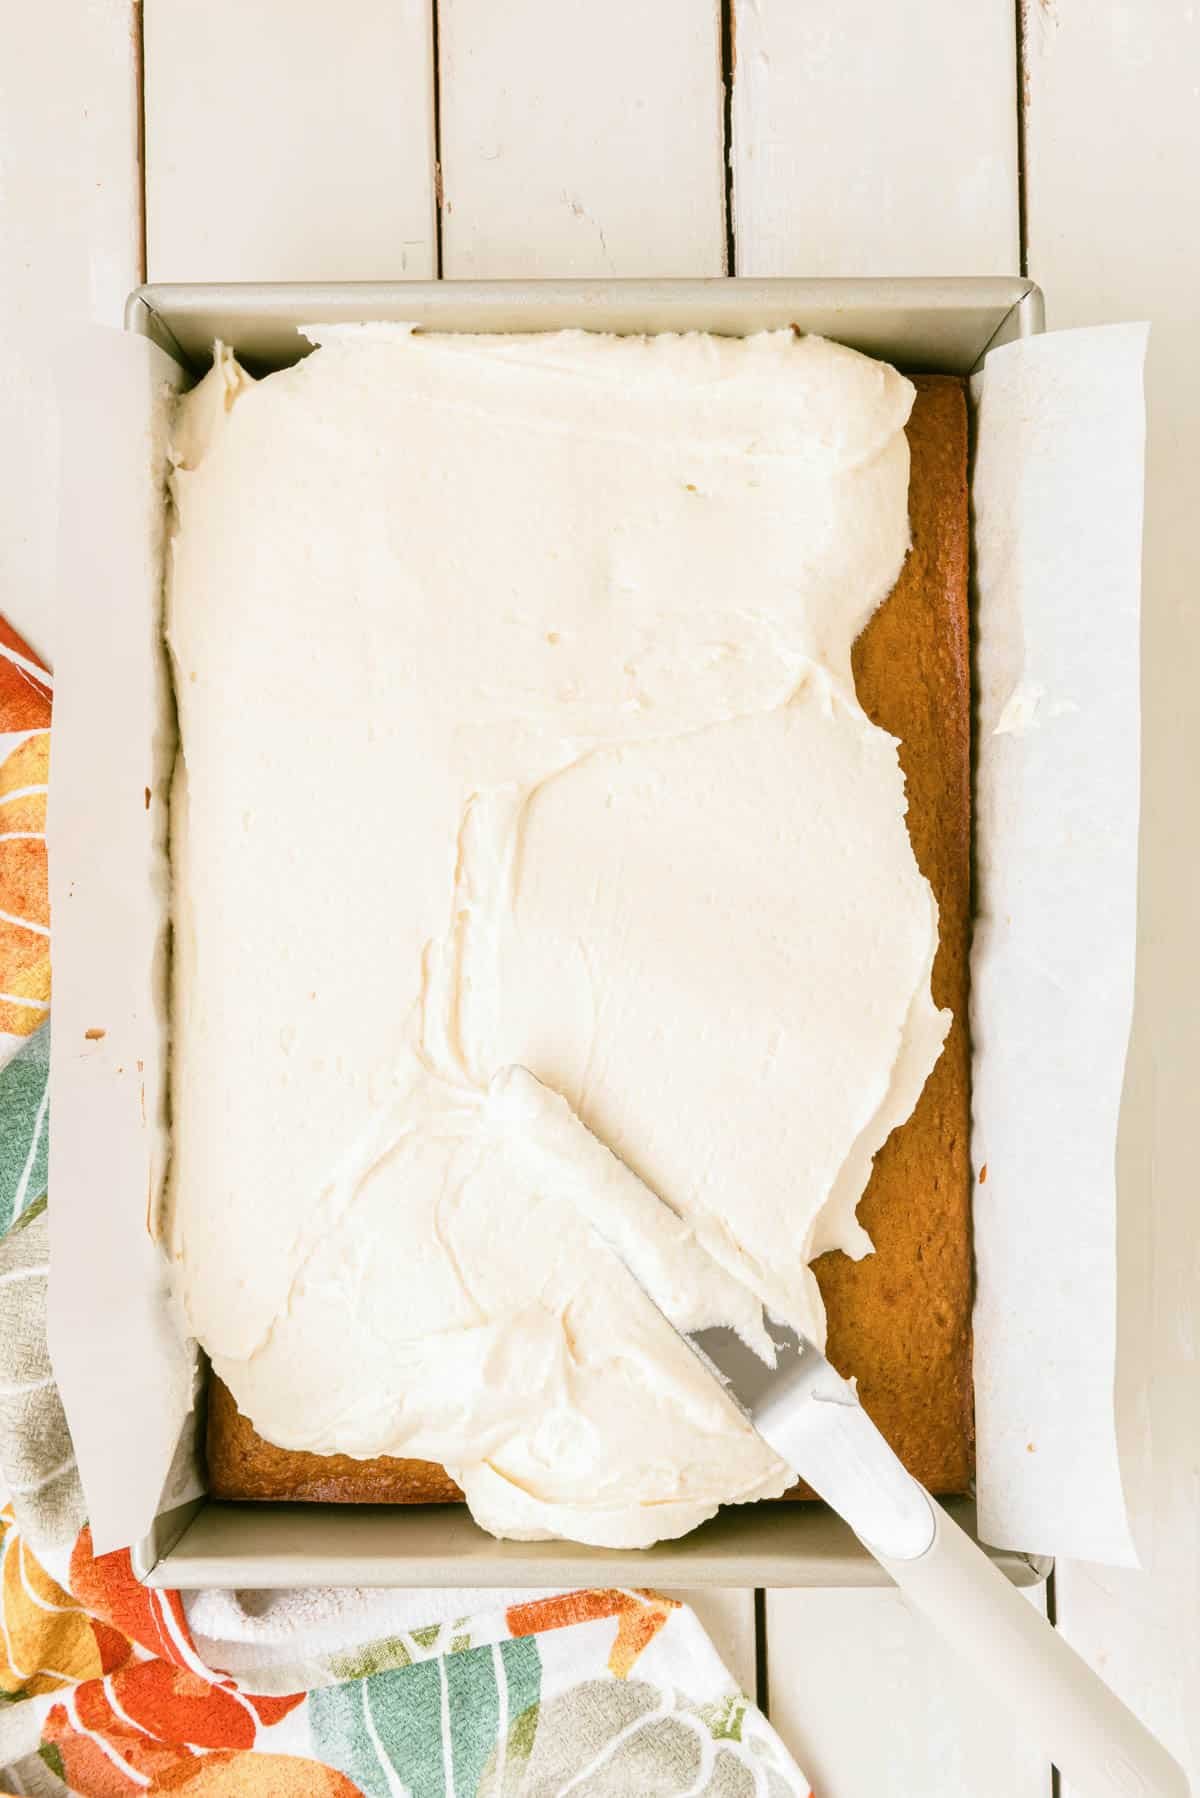 Cream cheese frosting being spread over a pumpkin cake in a pan.